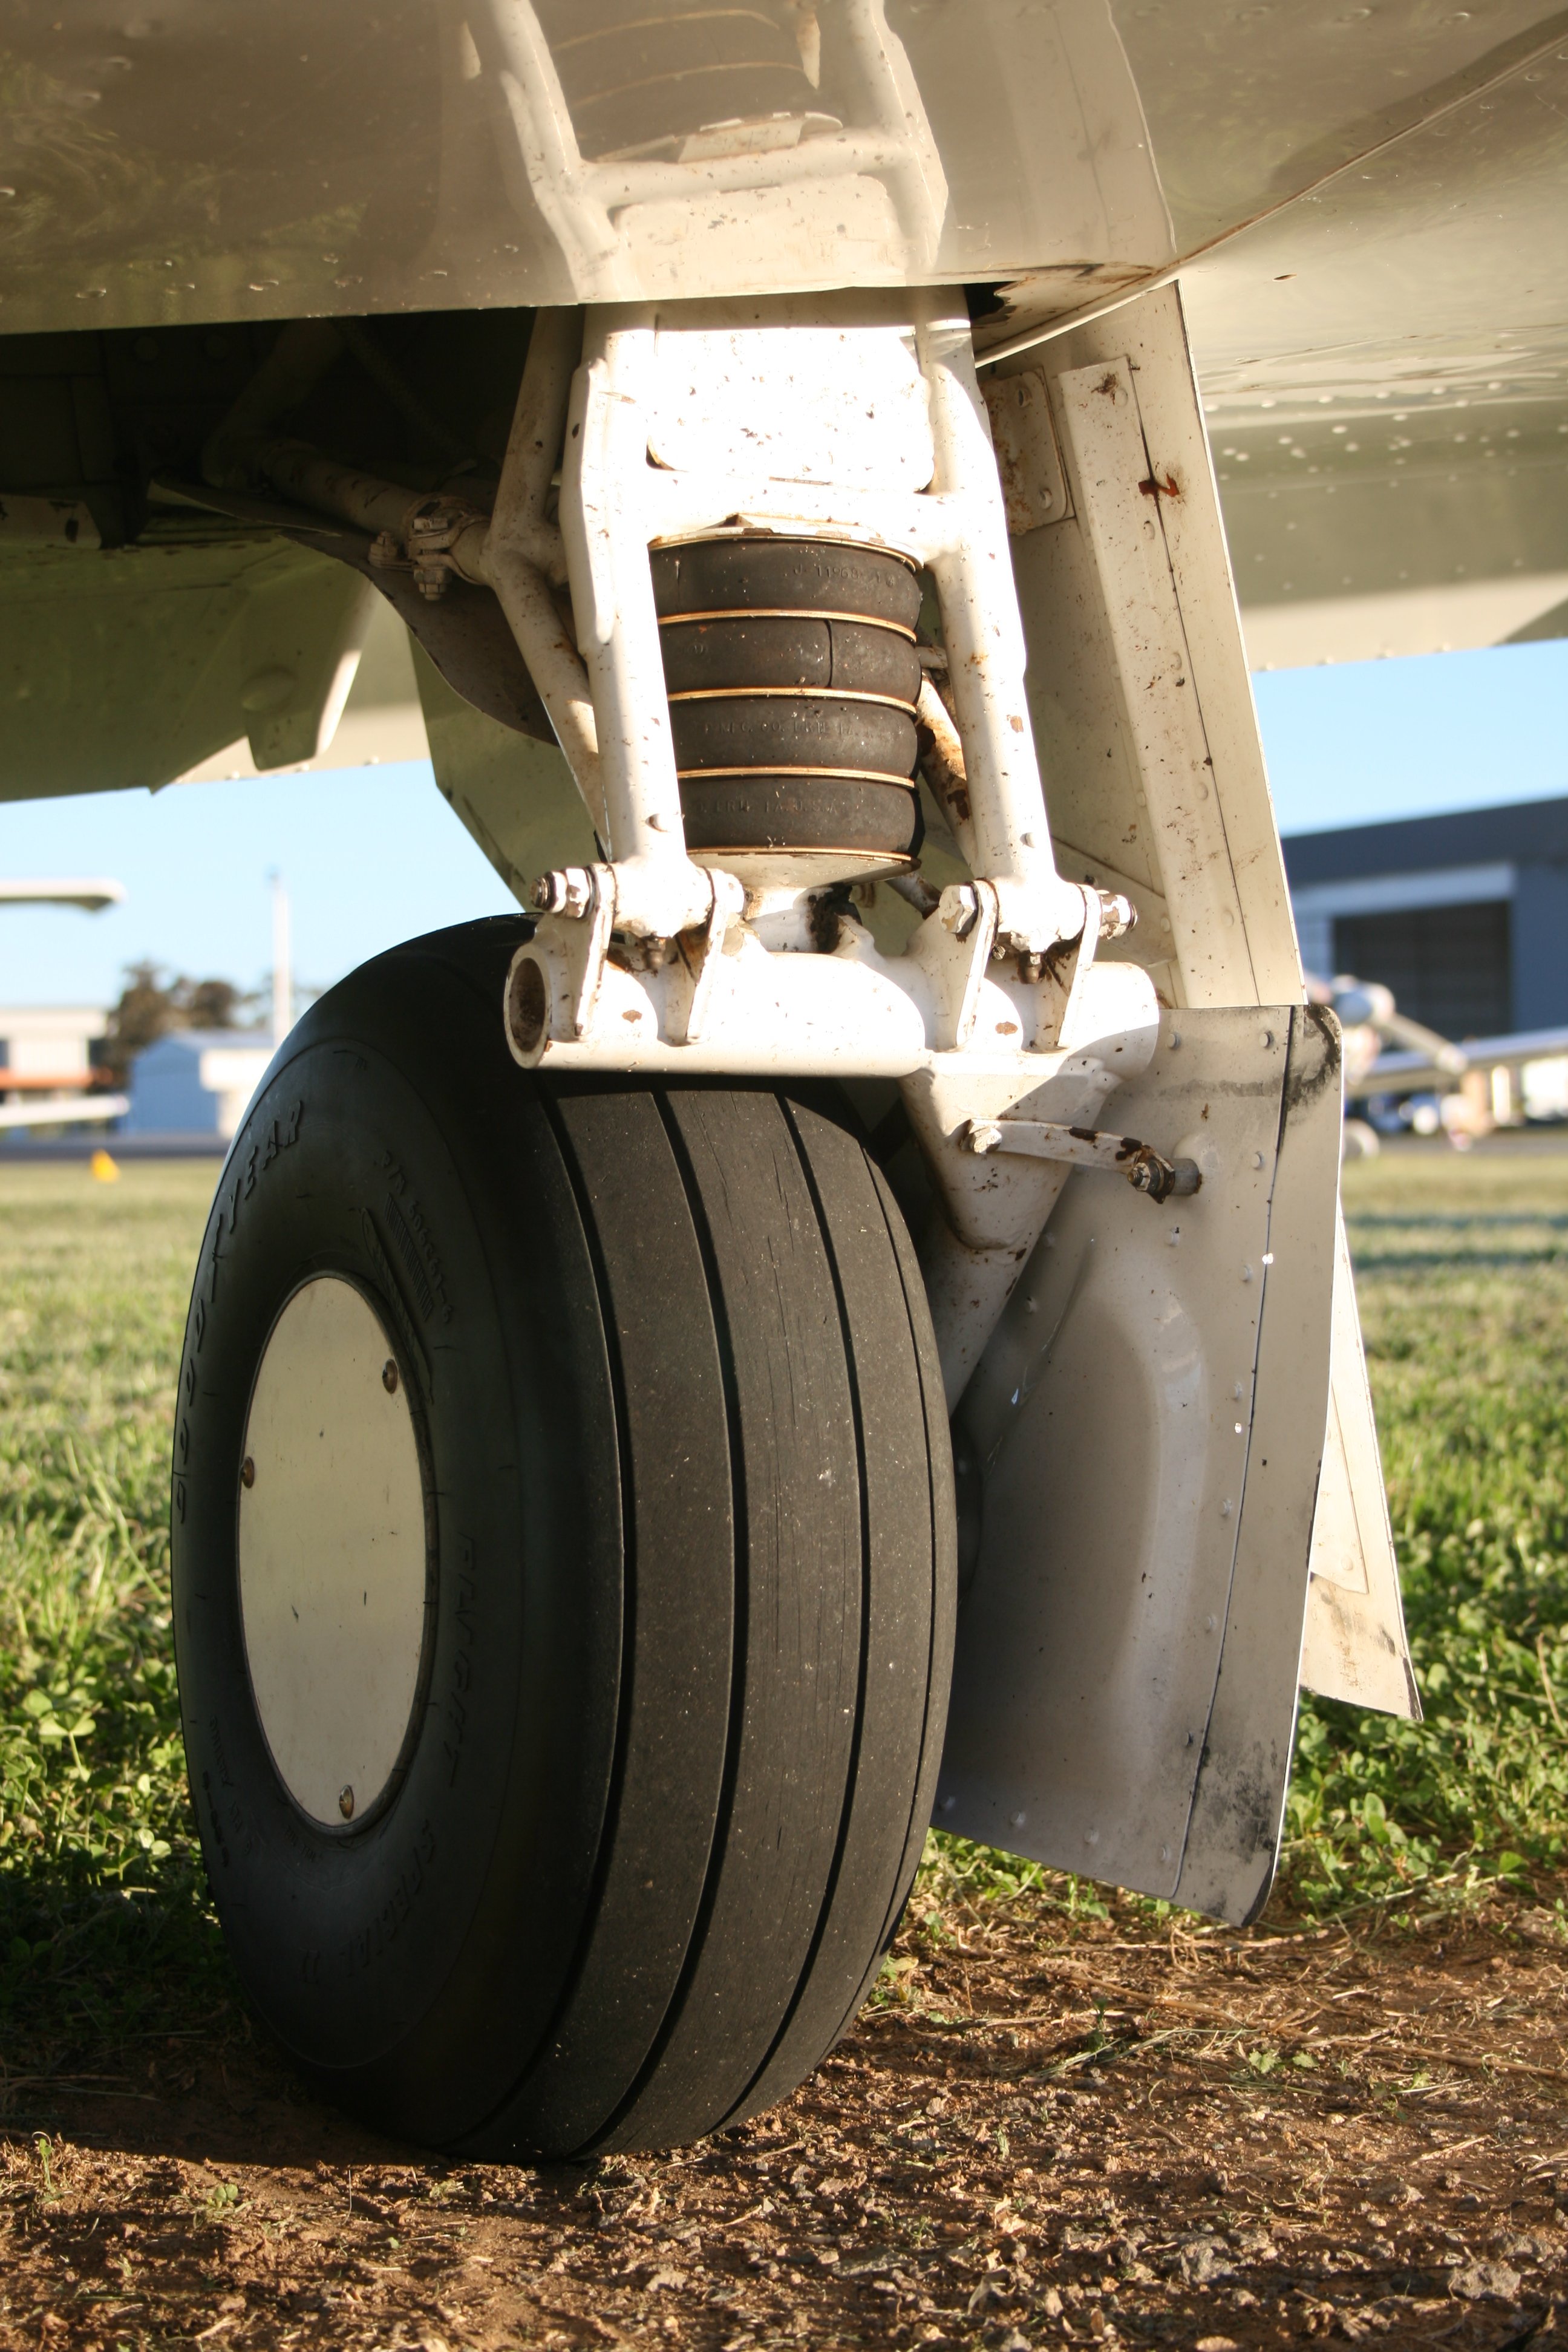 Rubber disc shock absorbers are seen in one of the two main landing gear legs of a Mooney M20F Executive 21, a single engine piston aircraft that seats a pilot and up to 3 passengers.